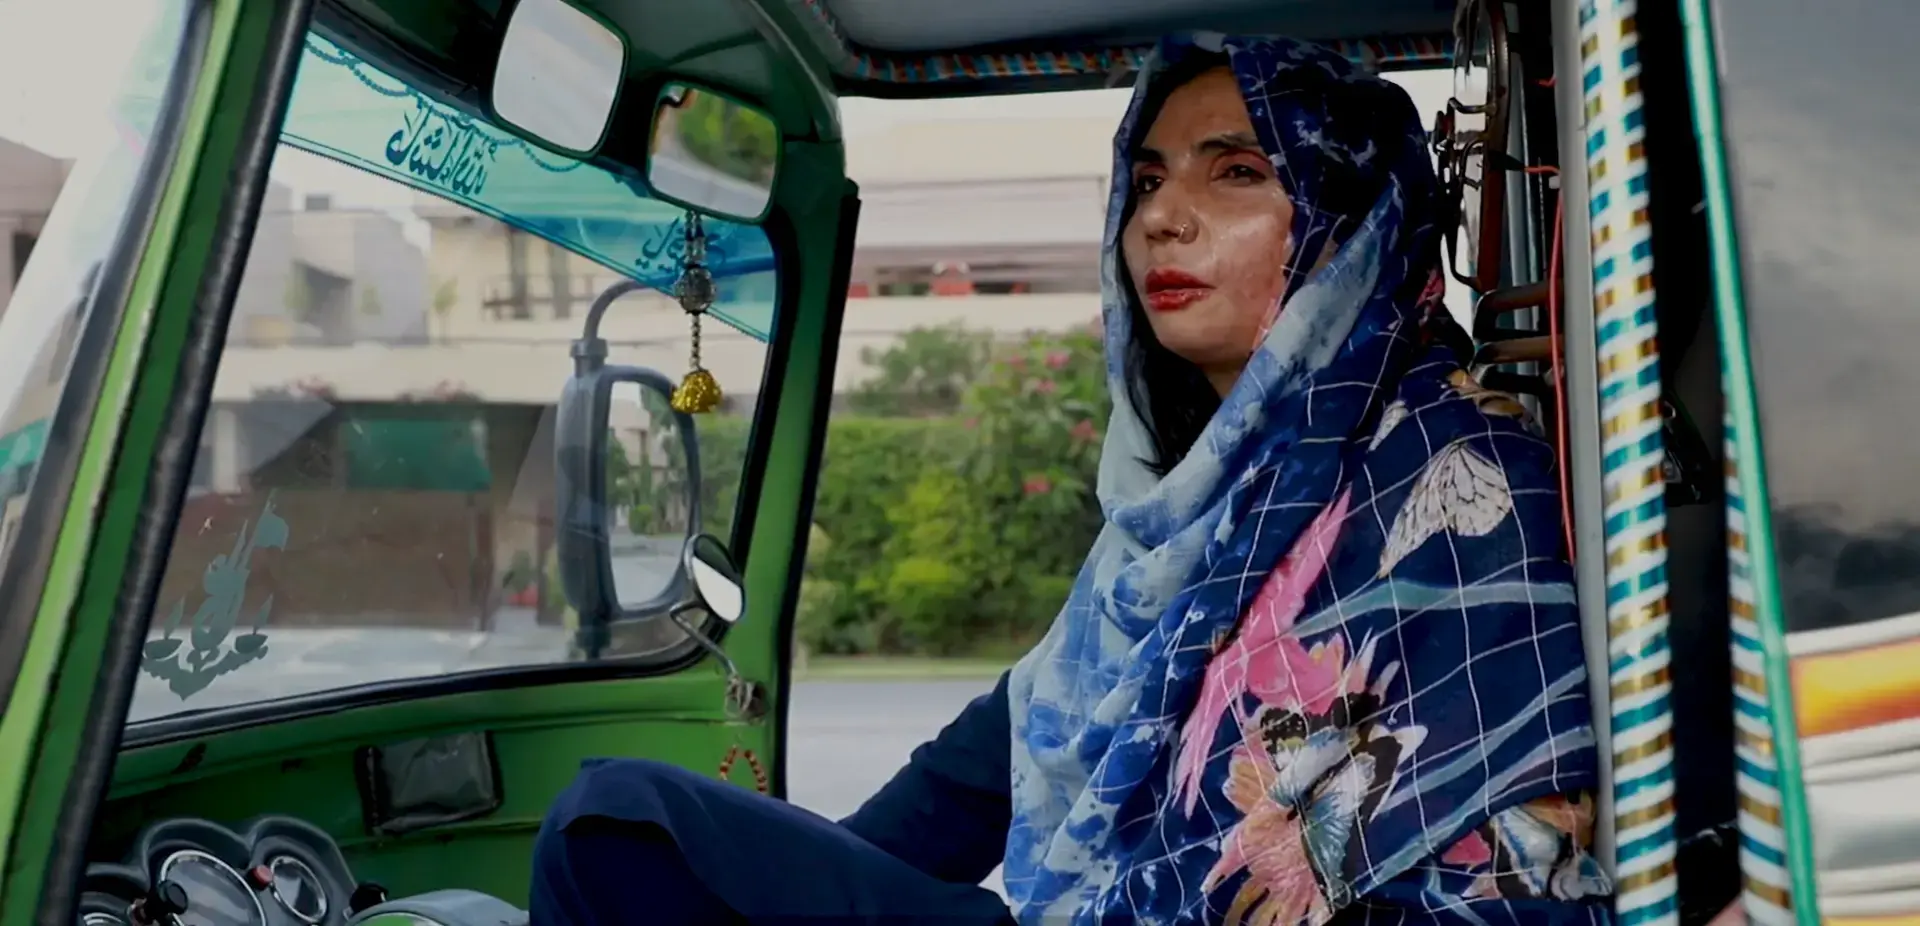 A women in the driver's seat in a rickshaw